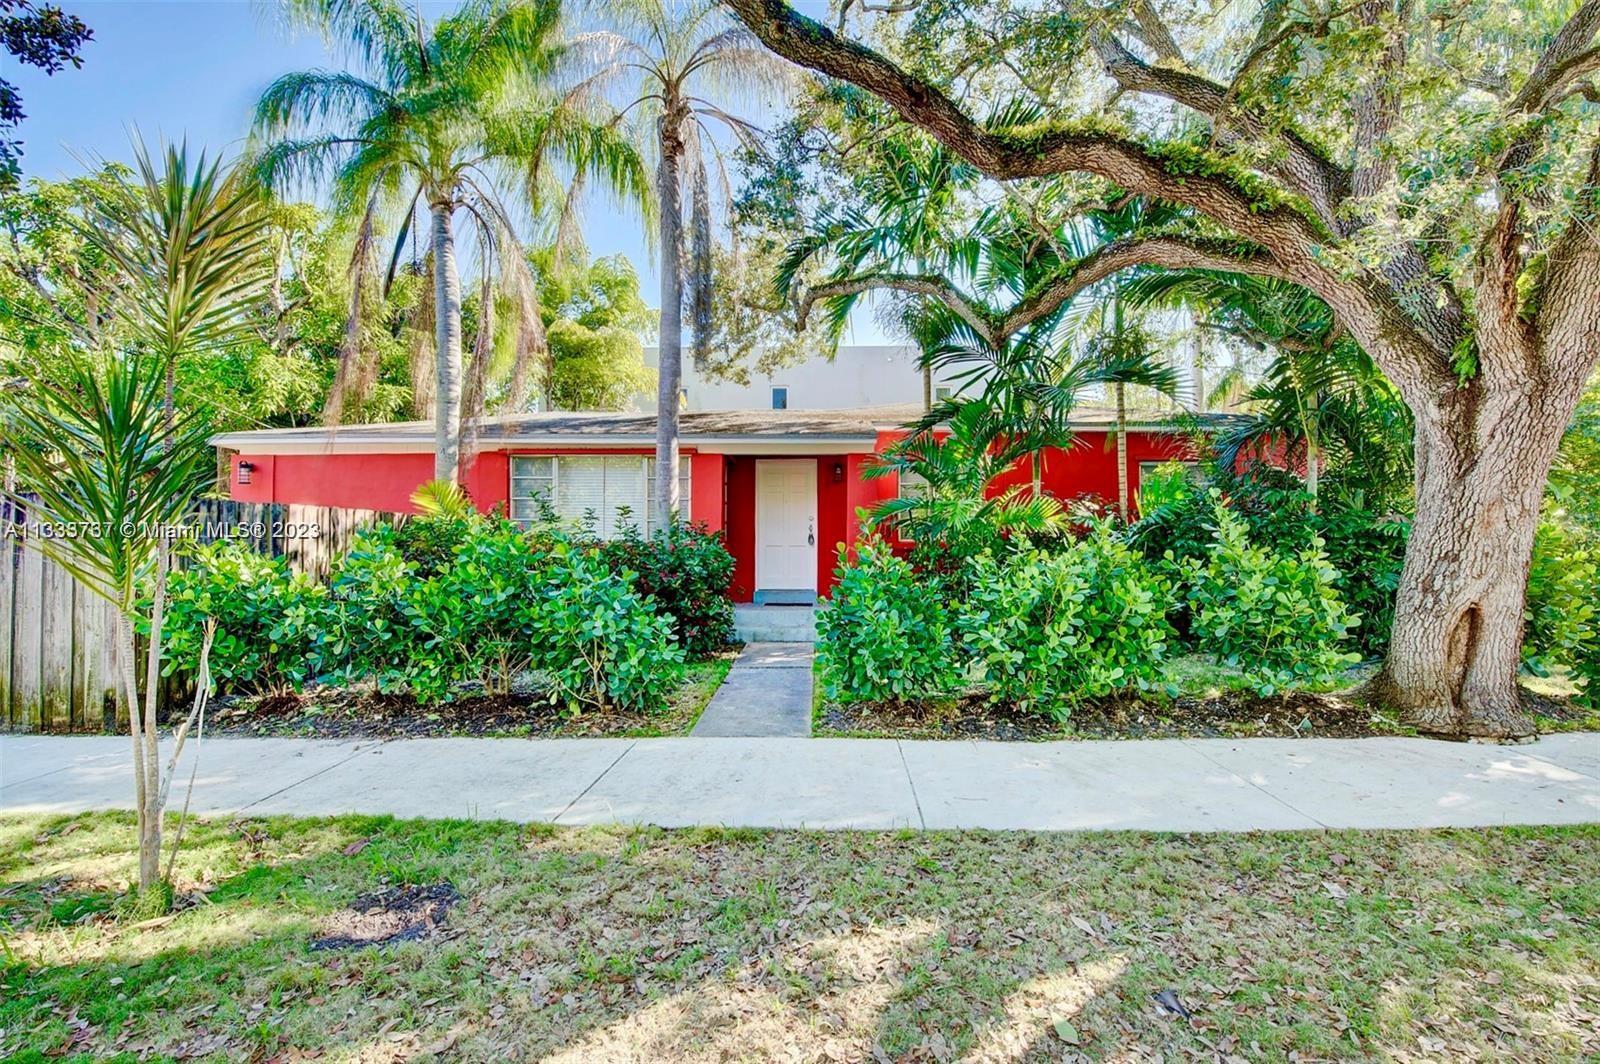 Welcome to a fabulous Artist-eclectic neighborhood! Imagine living in this updated North Coconut Grove 3 bedroom/ 2 bathroom corner home with new washer and dryer. Enjoy the functional floor plan of this darling and bright home. Nice yard completely fenced in with additional open patio and a lovely Mango Tree. Perfect for outdoor gatherings. Conveniently located near Kennedy Park, Fresh Market, Montys, StarBucks, Grove Harbor, the Famous North Grove Kapok tree, Ransom School, Coral Reef Yacht Club, Sailing Club,Regatta Harbour, Anatomy Luxury Gym, Fine restaurants, Art Boutiques and the NEW Cocowalk! Very friendly-fun neighborhood! Available March 1st for rent and for sale. New Washer and Dryer